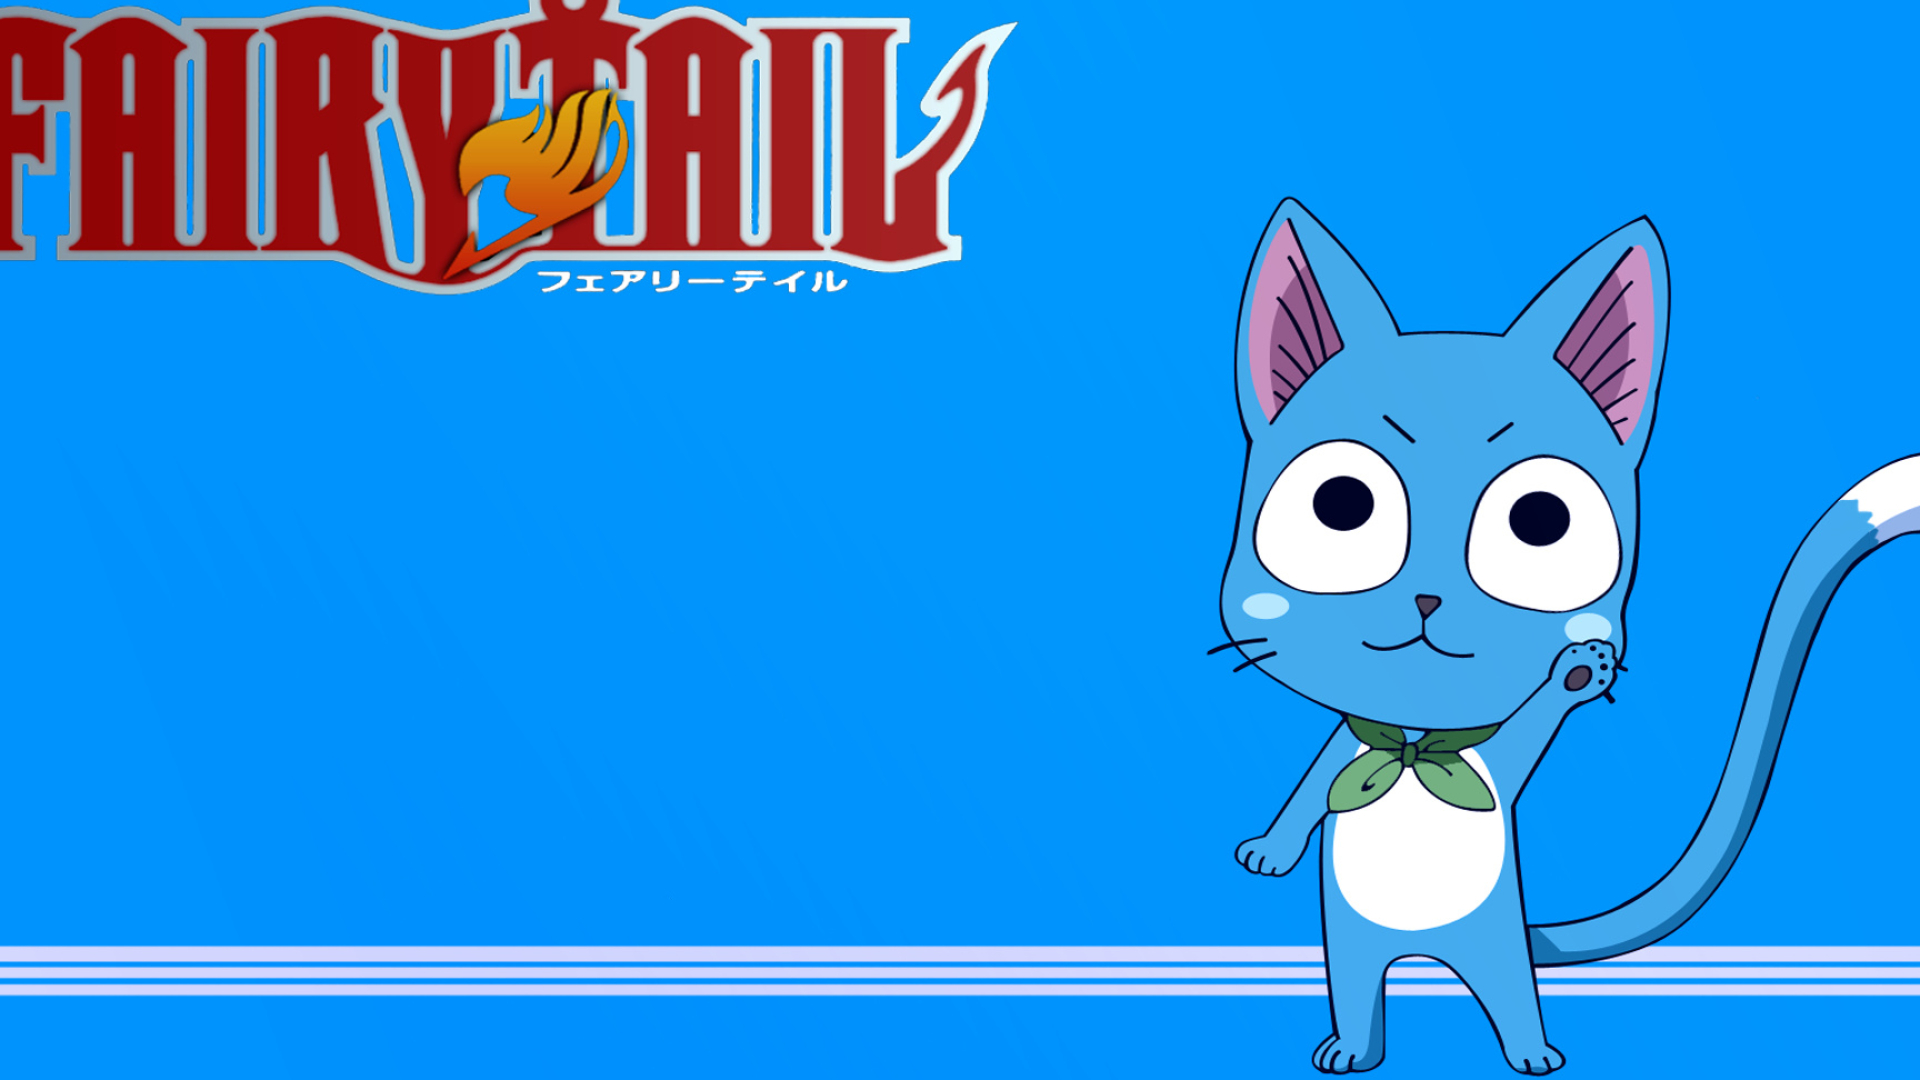 Happy (Fairy Tail): An action-adventure anime series, Cat. 1920x1080 Full HD Background.